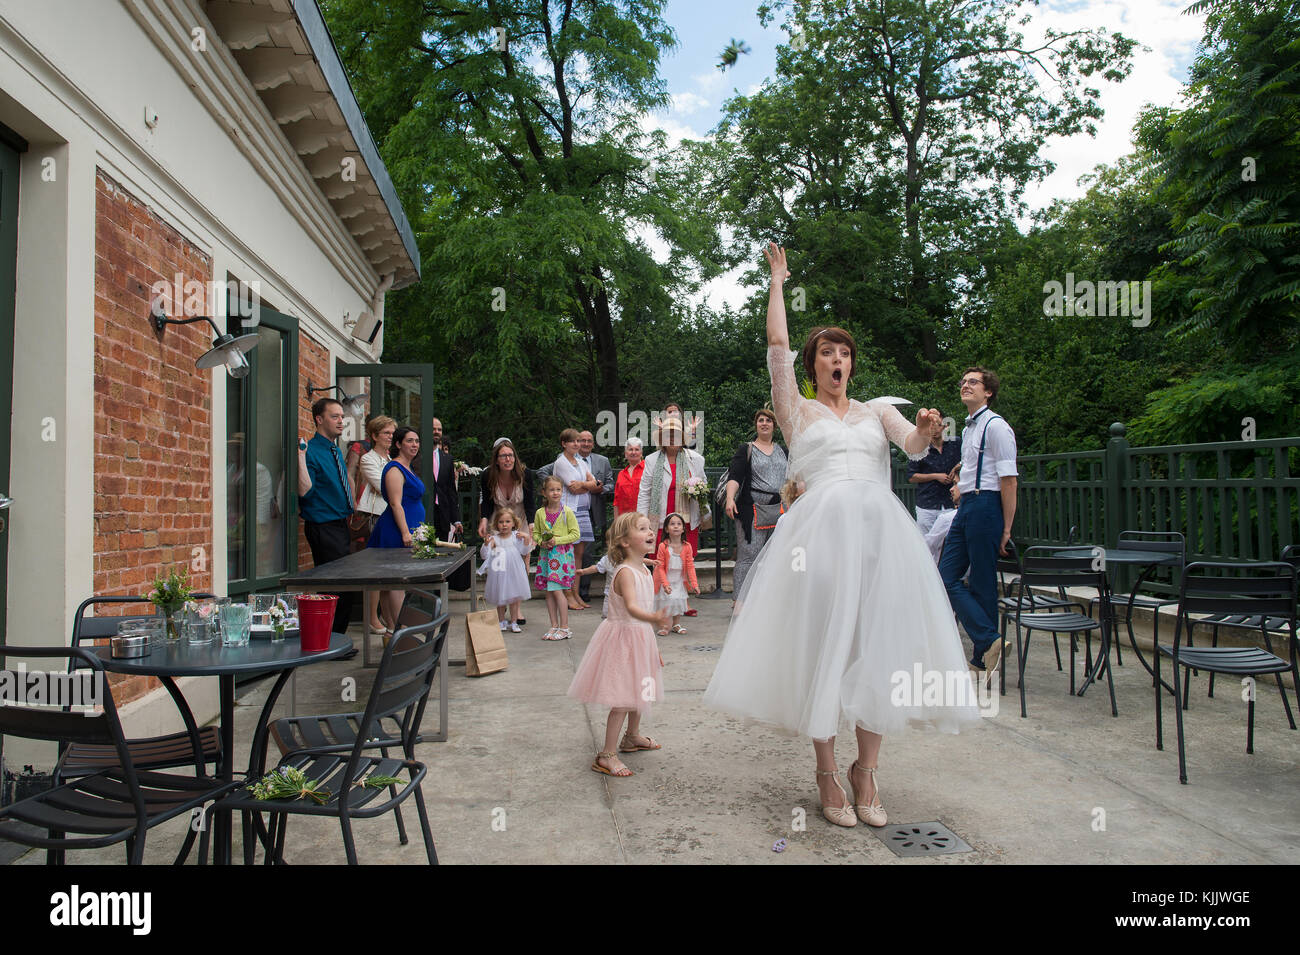 Bride throwing her bouquet. France. Stock Photo